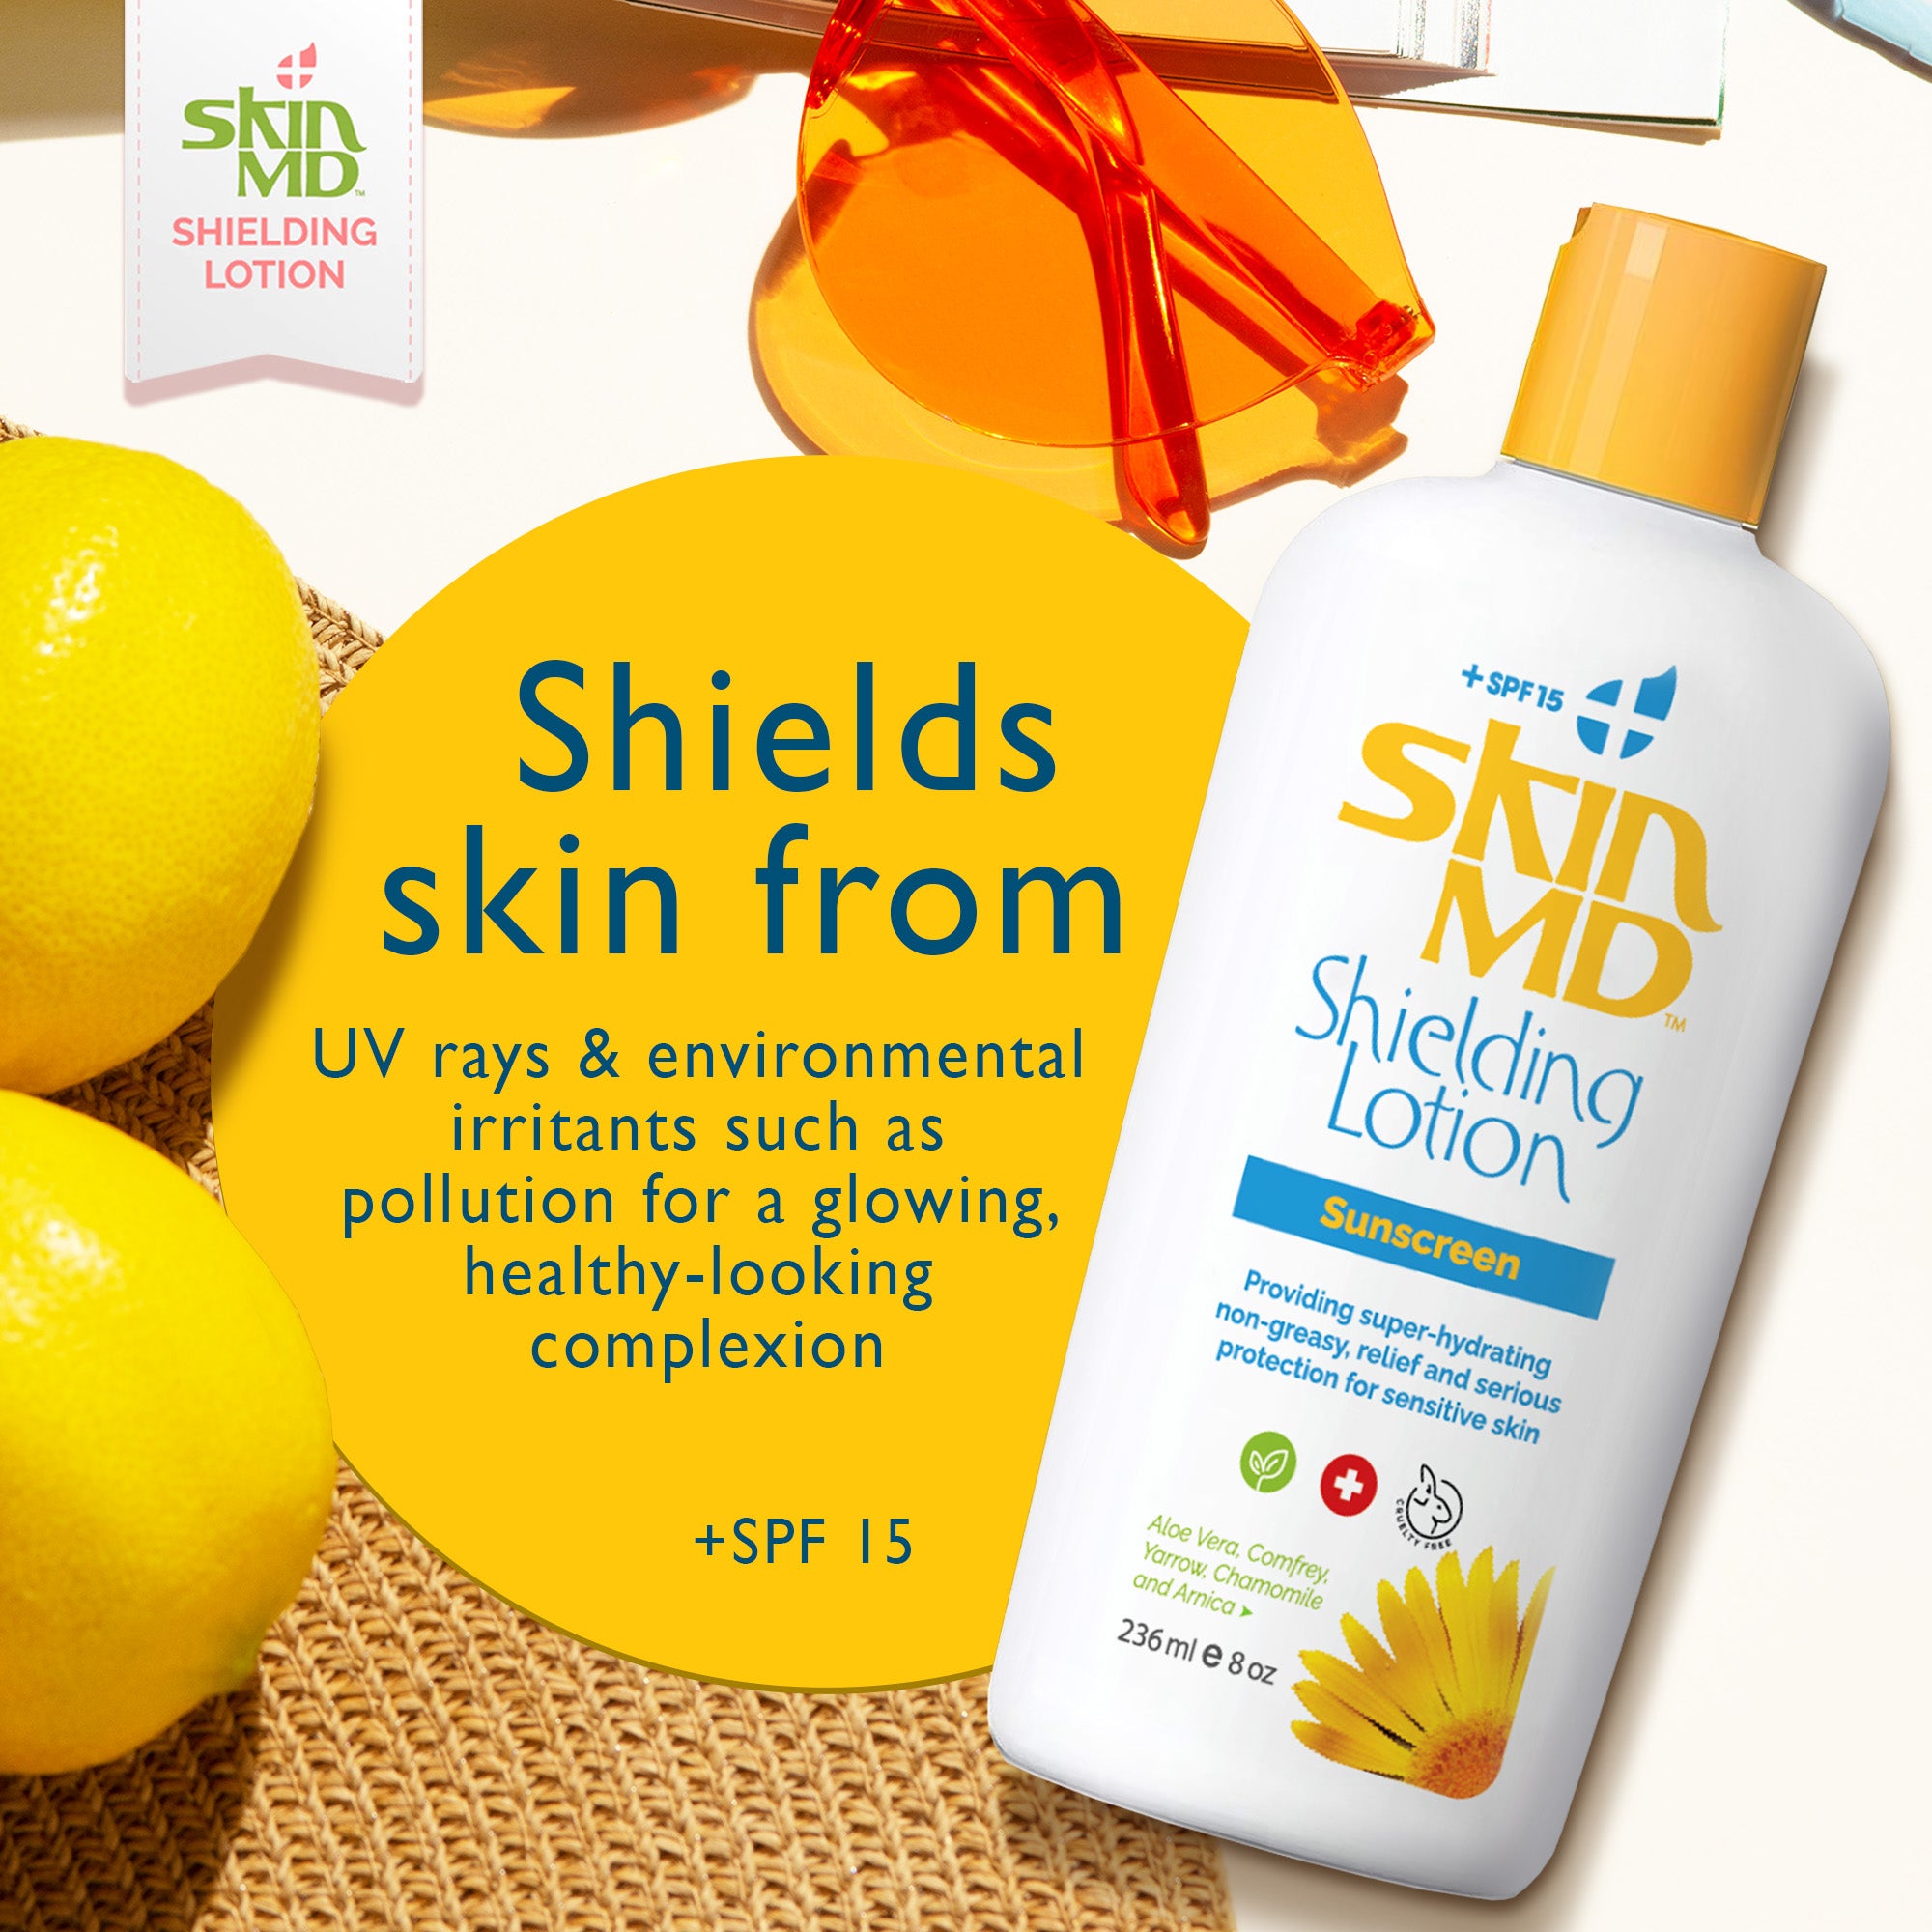 Skin MD Shielding Lotion Sunscreen with SPF 15 8oz